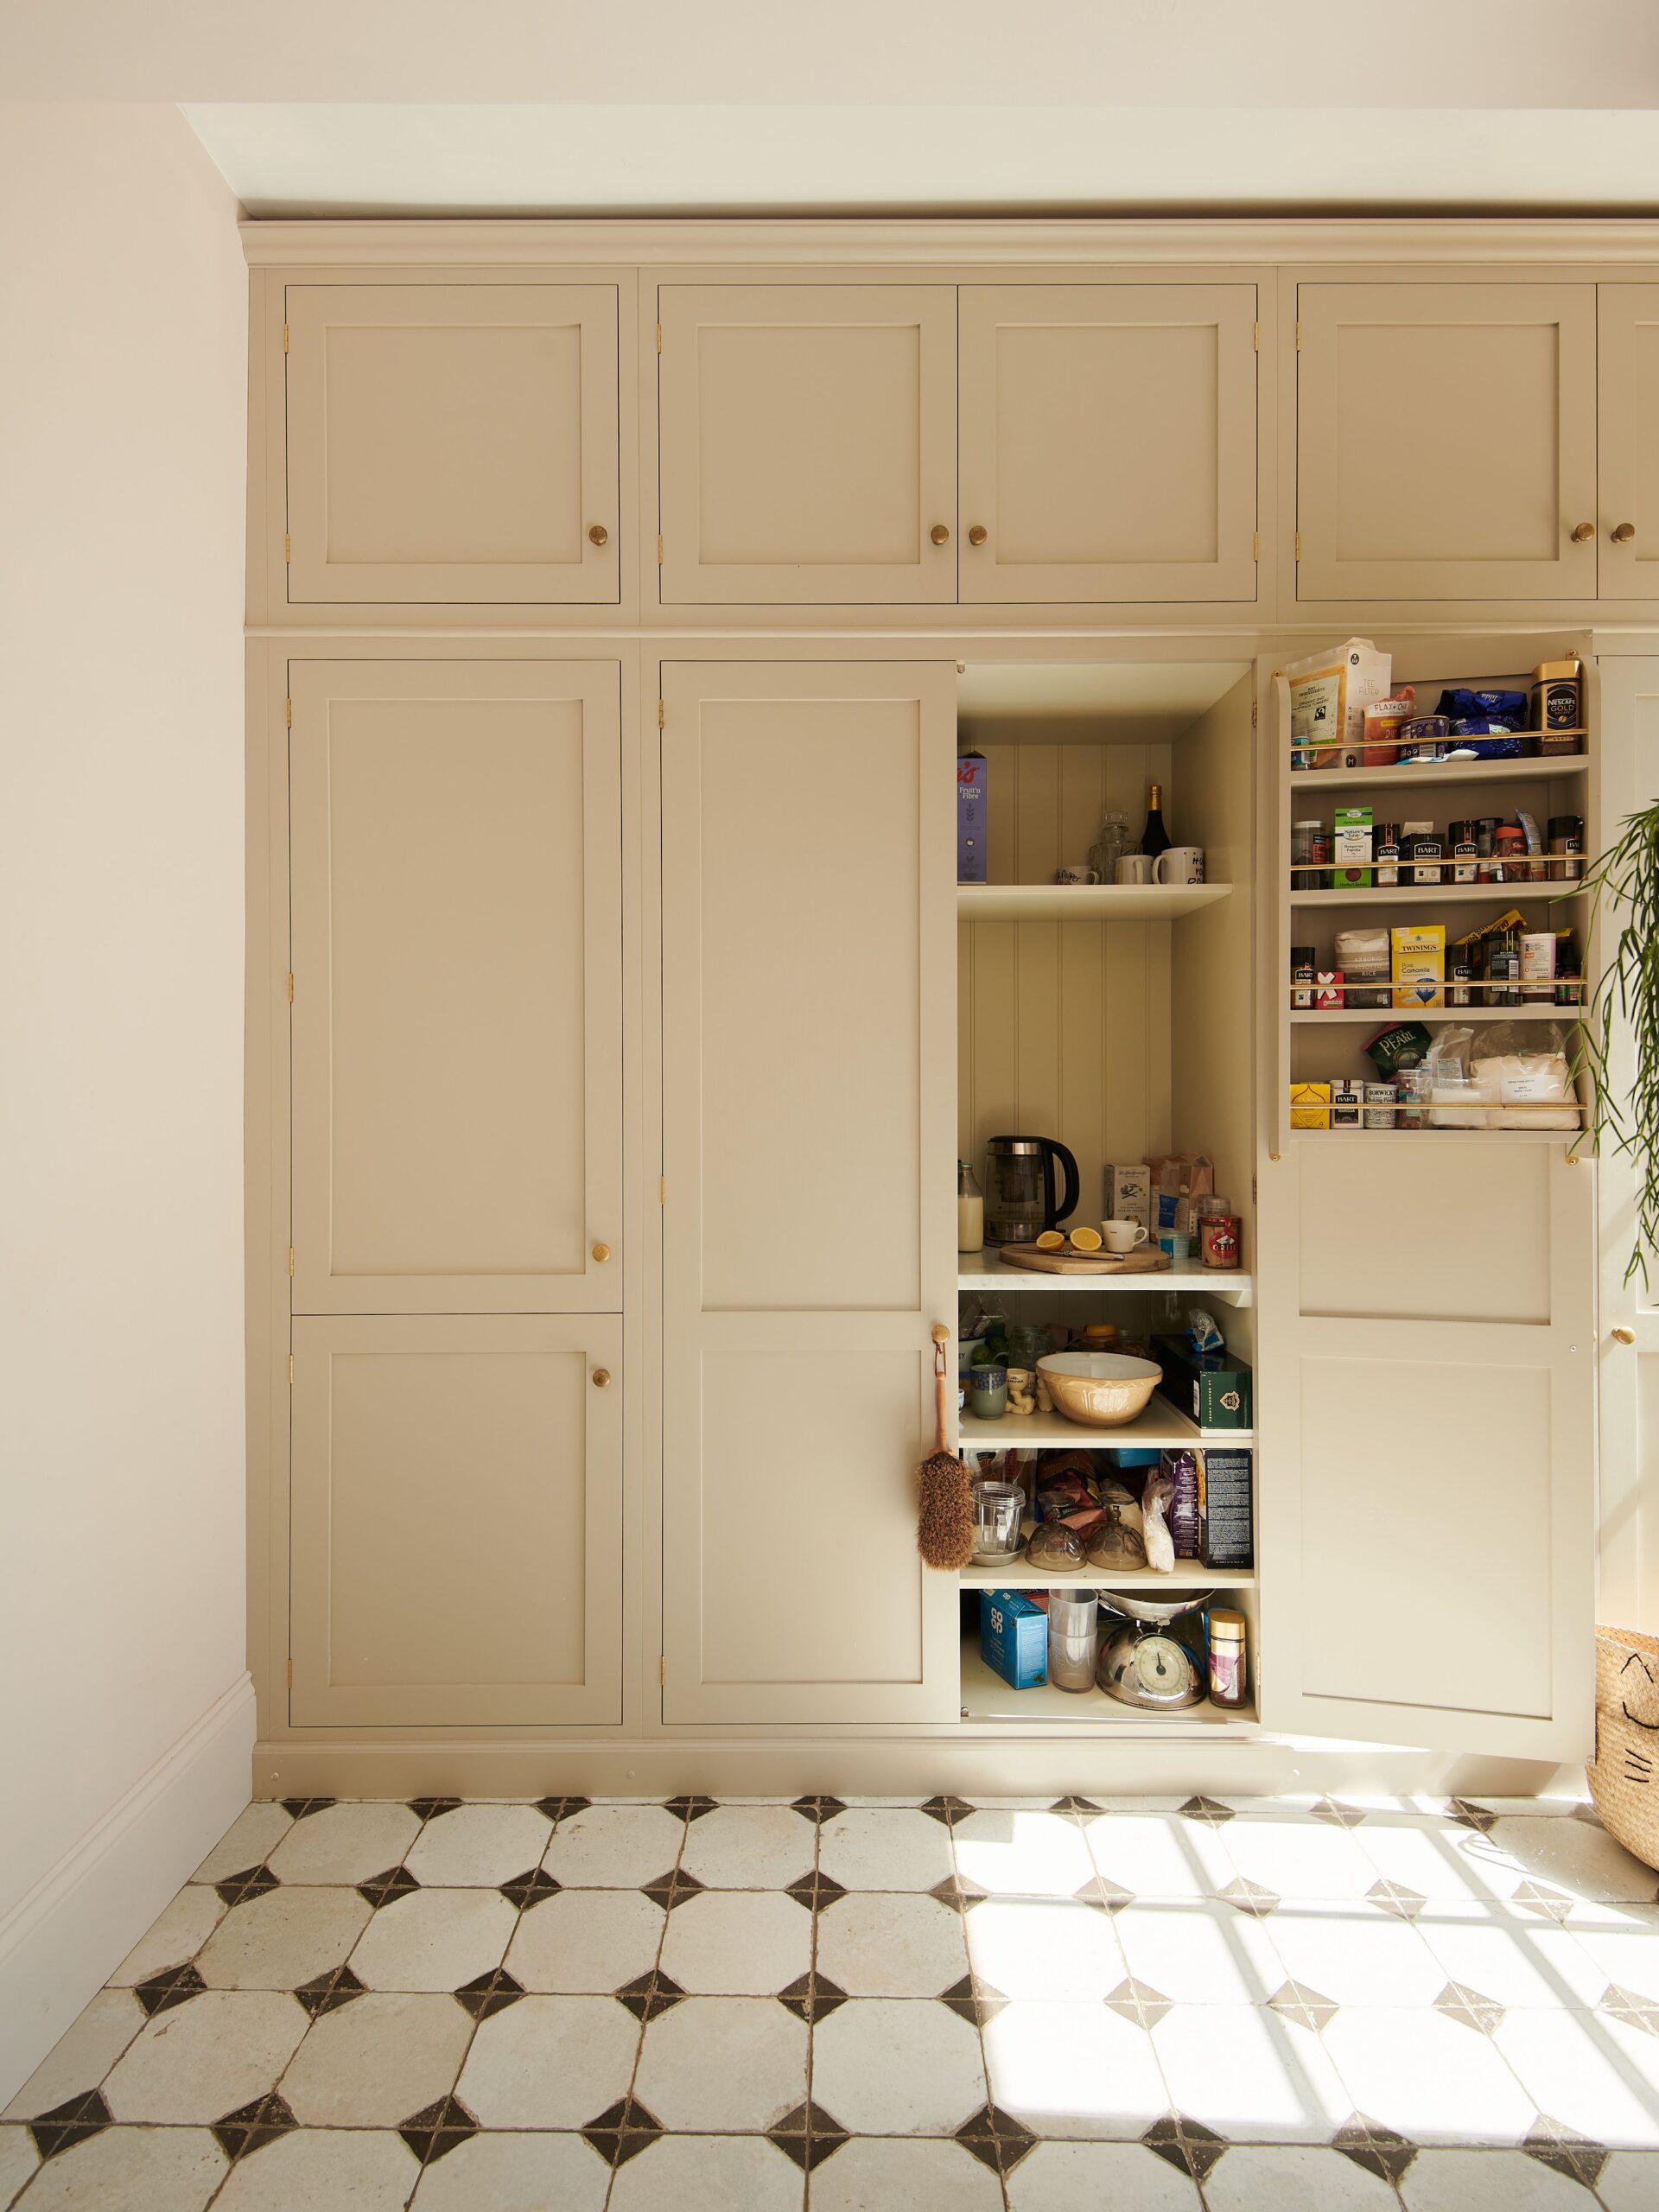 Updating Your Kitchen Cabinets with a
Fresh Coat of Paint